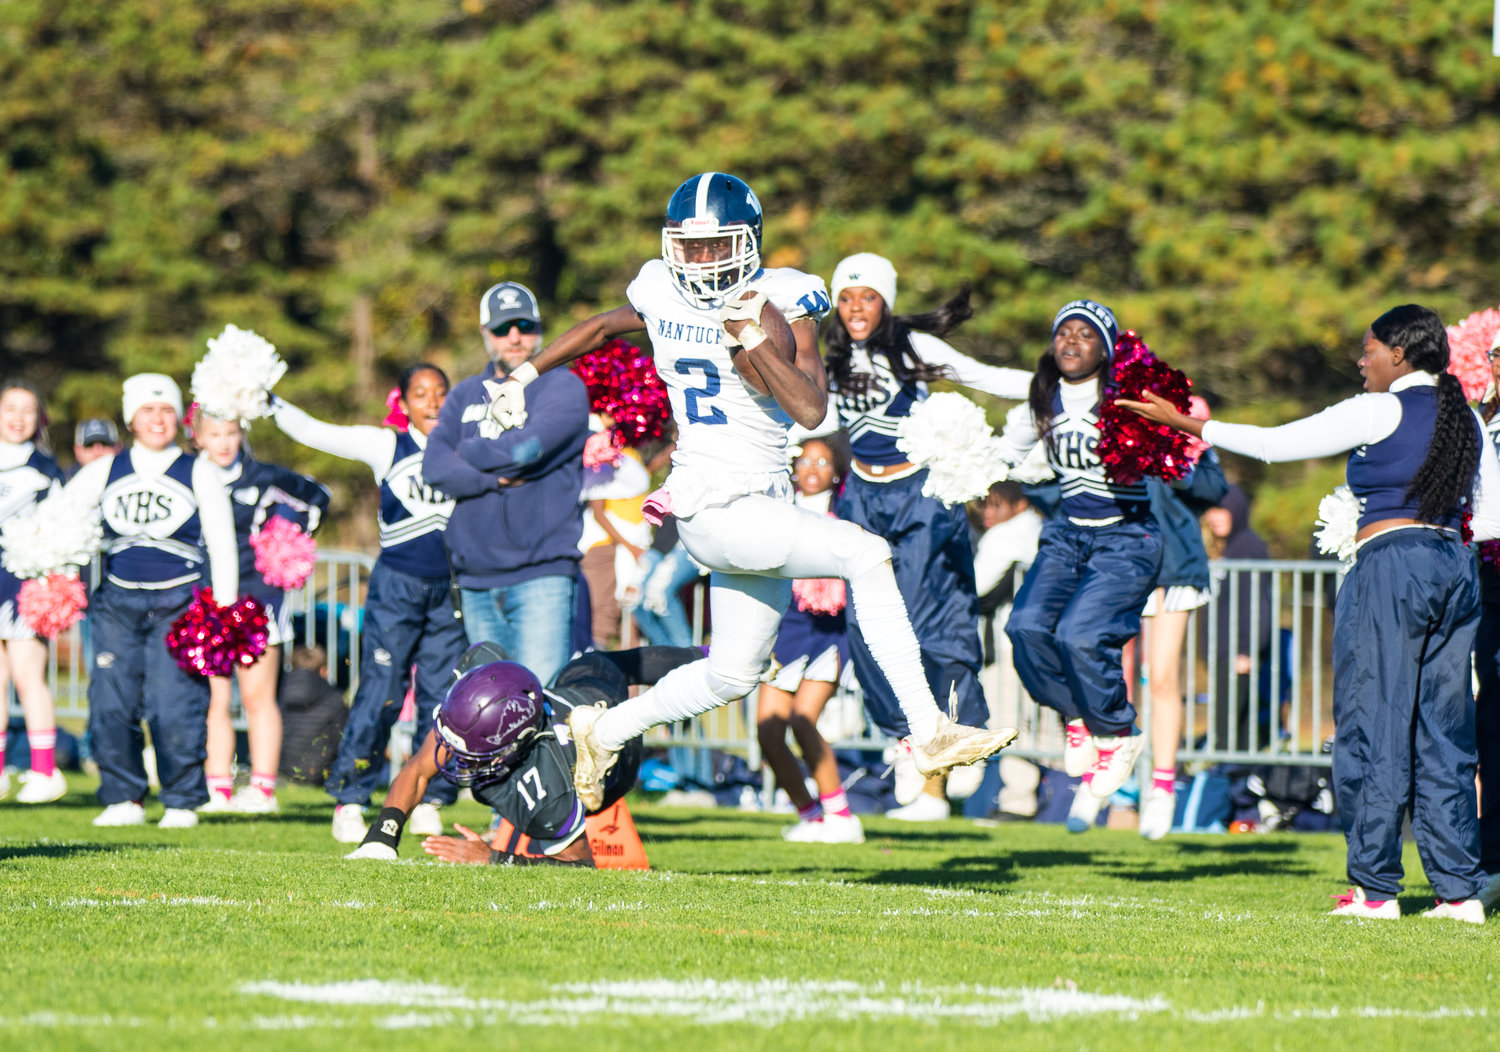 Jayquan Francis high-steps into the end zone on a would-be touchdown run that was called back due to a penalty. Nantucket fell to Martha’s Vineyard 14-13.